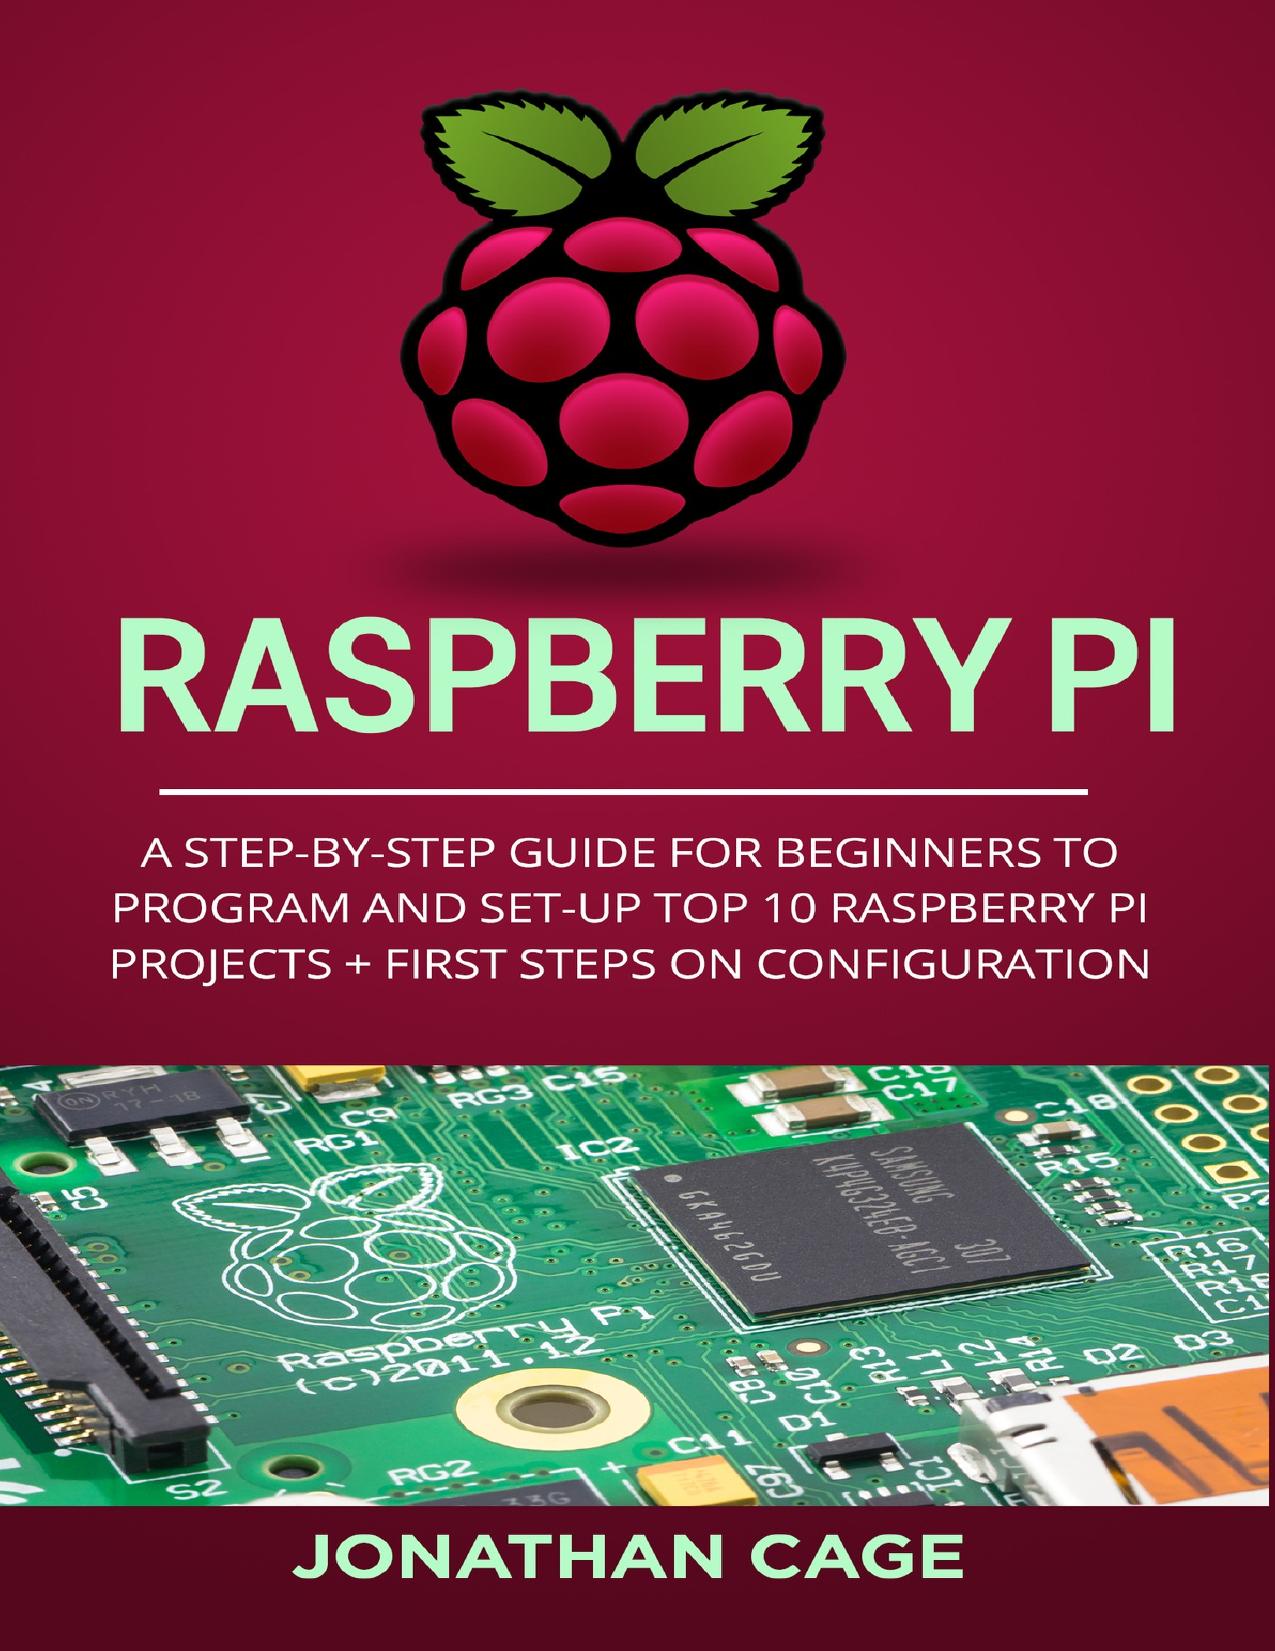 Raspberry Pi: A Step-by-Step Guide For Beginners to Program and Set-Up Top 10 Raspberry Pi Projects + First Steps on Configuration by Cage Jonathan